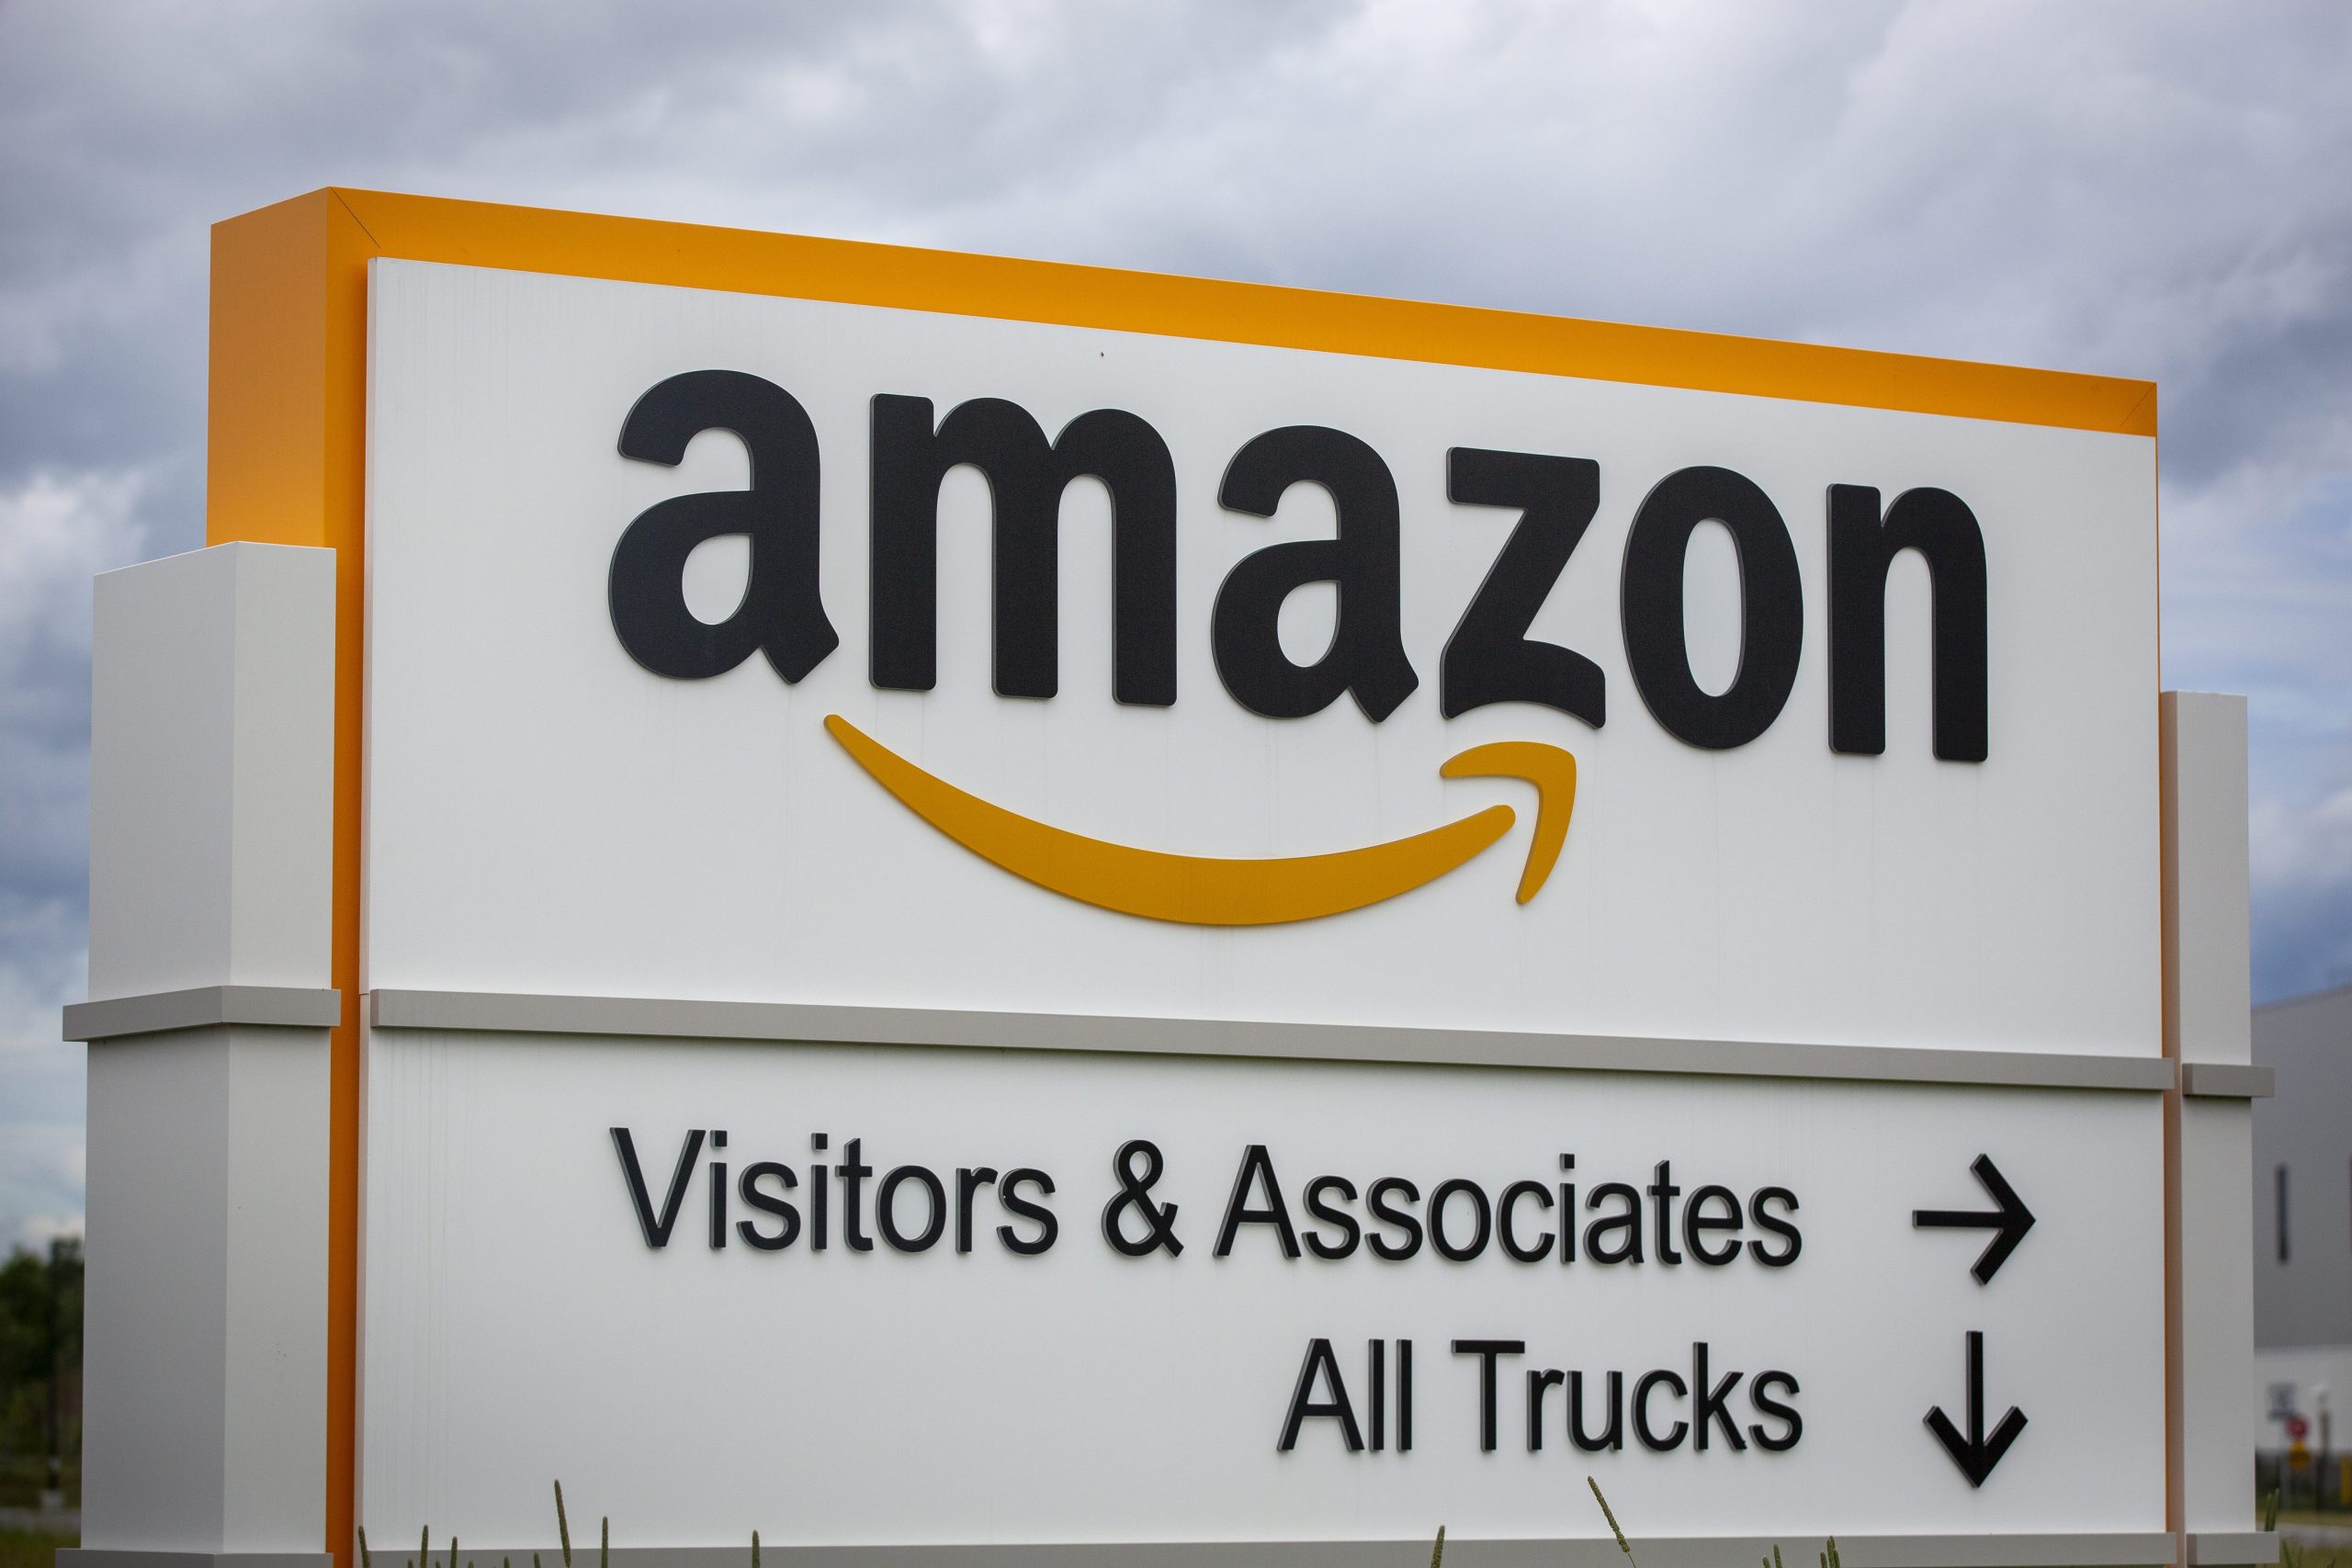 Amazon Says It S Not Building New Warehouse On Pickering Wetlands Citing Environmental Concerns 680 News